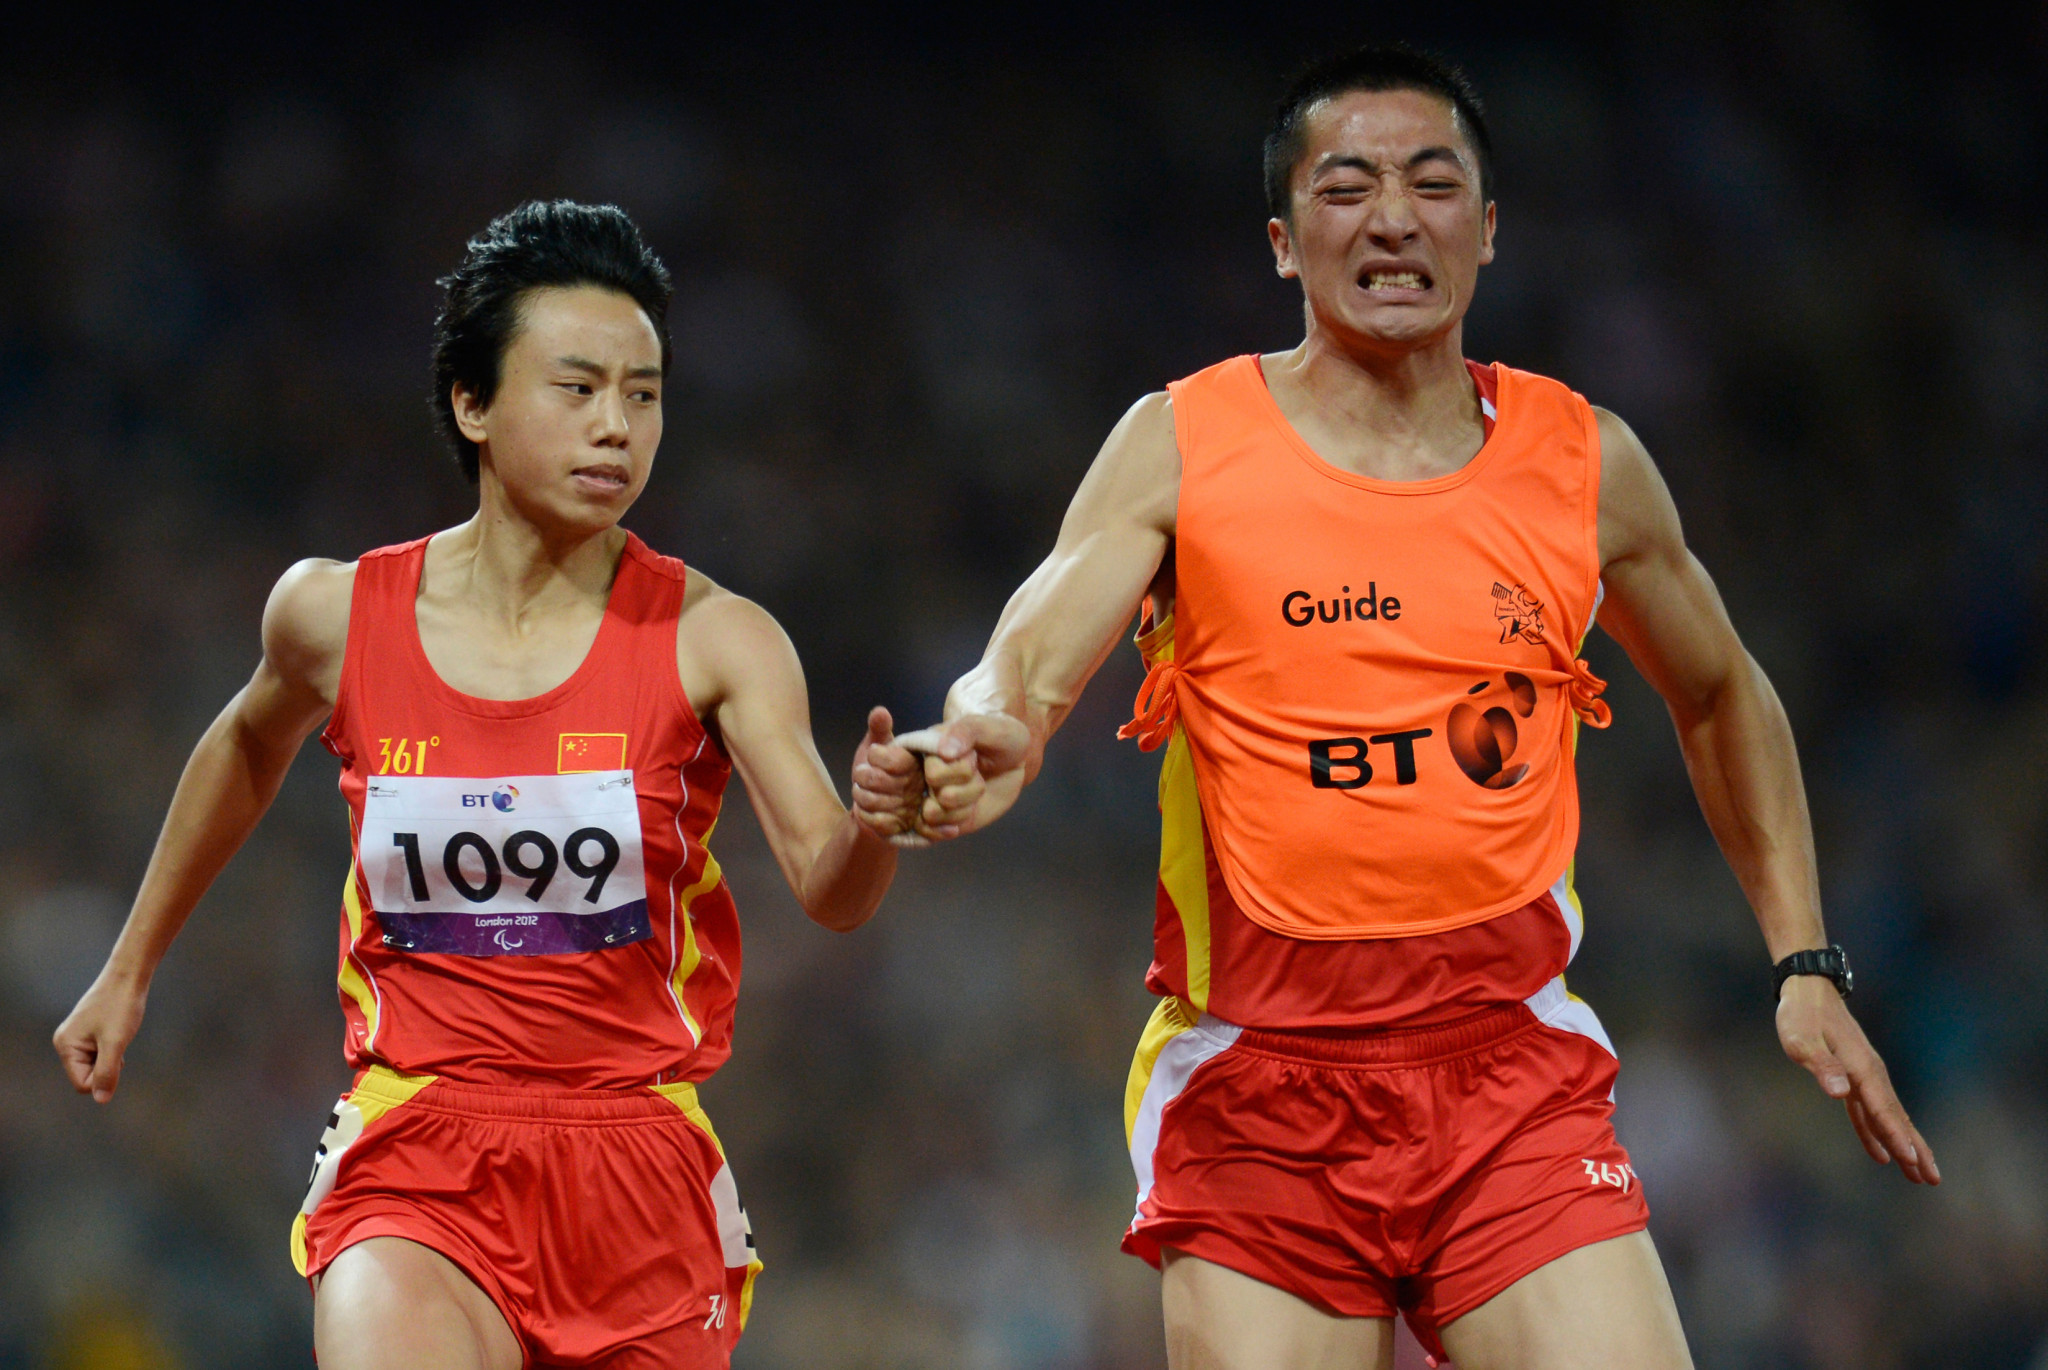 China's double Paralympic gold medallist Zhou Guohua won the women's 100m T11 final ©Getty Images 